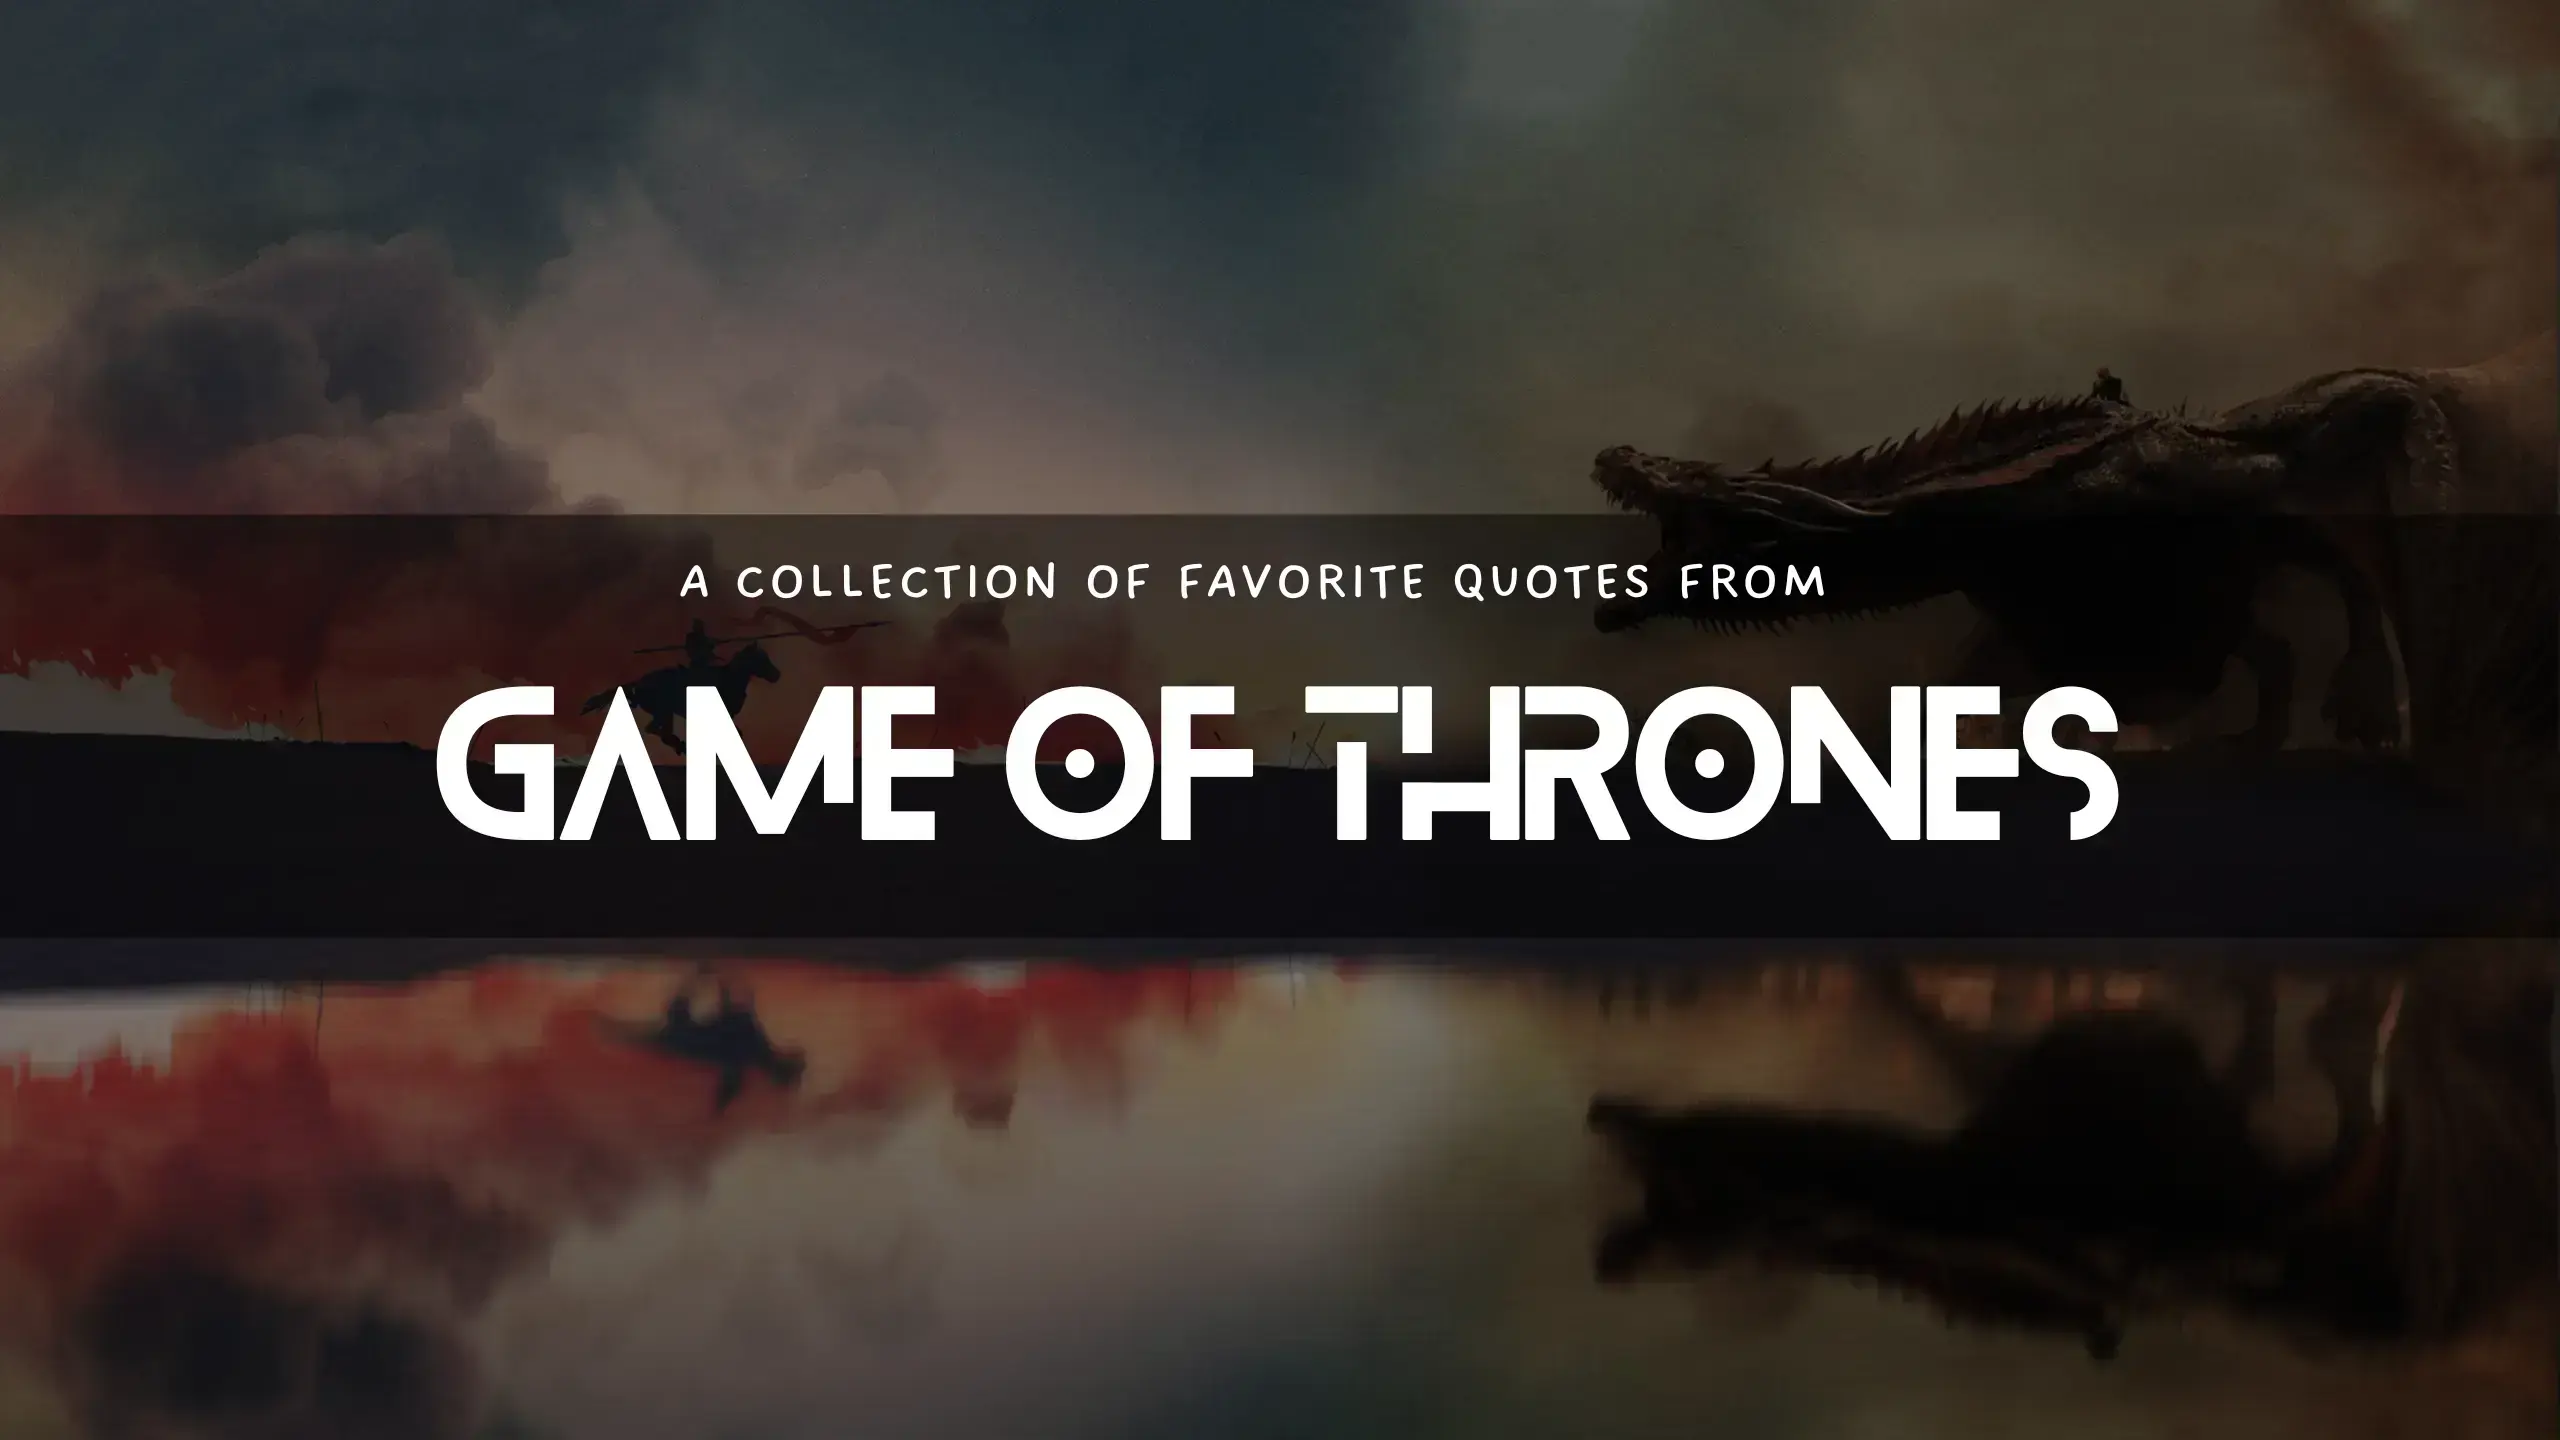 Awesome quotes from Game of Thrones